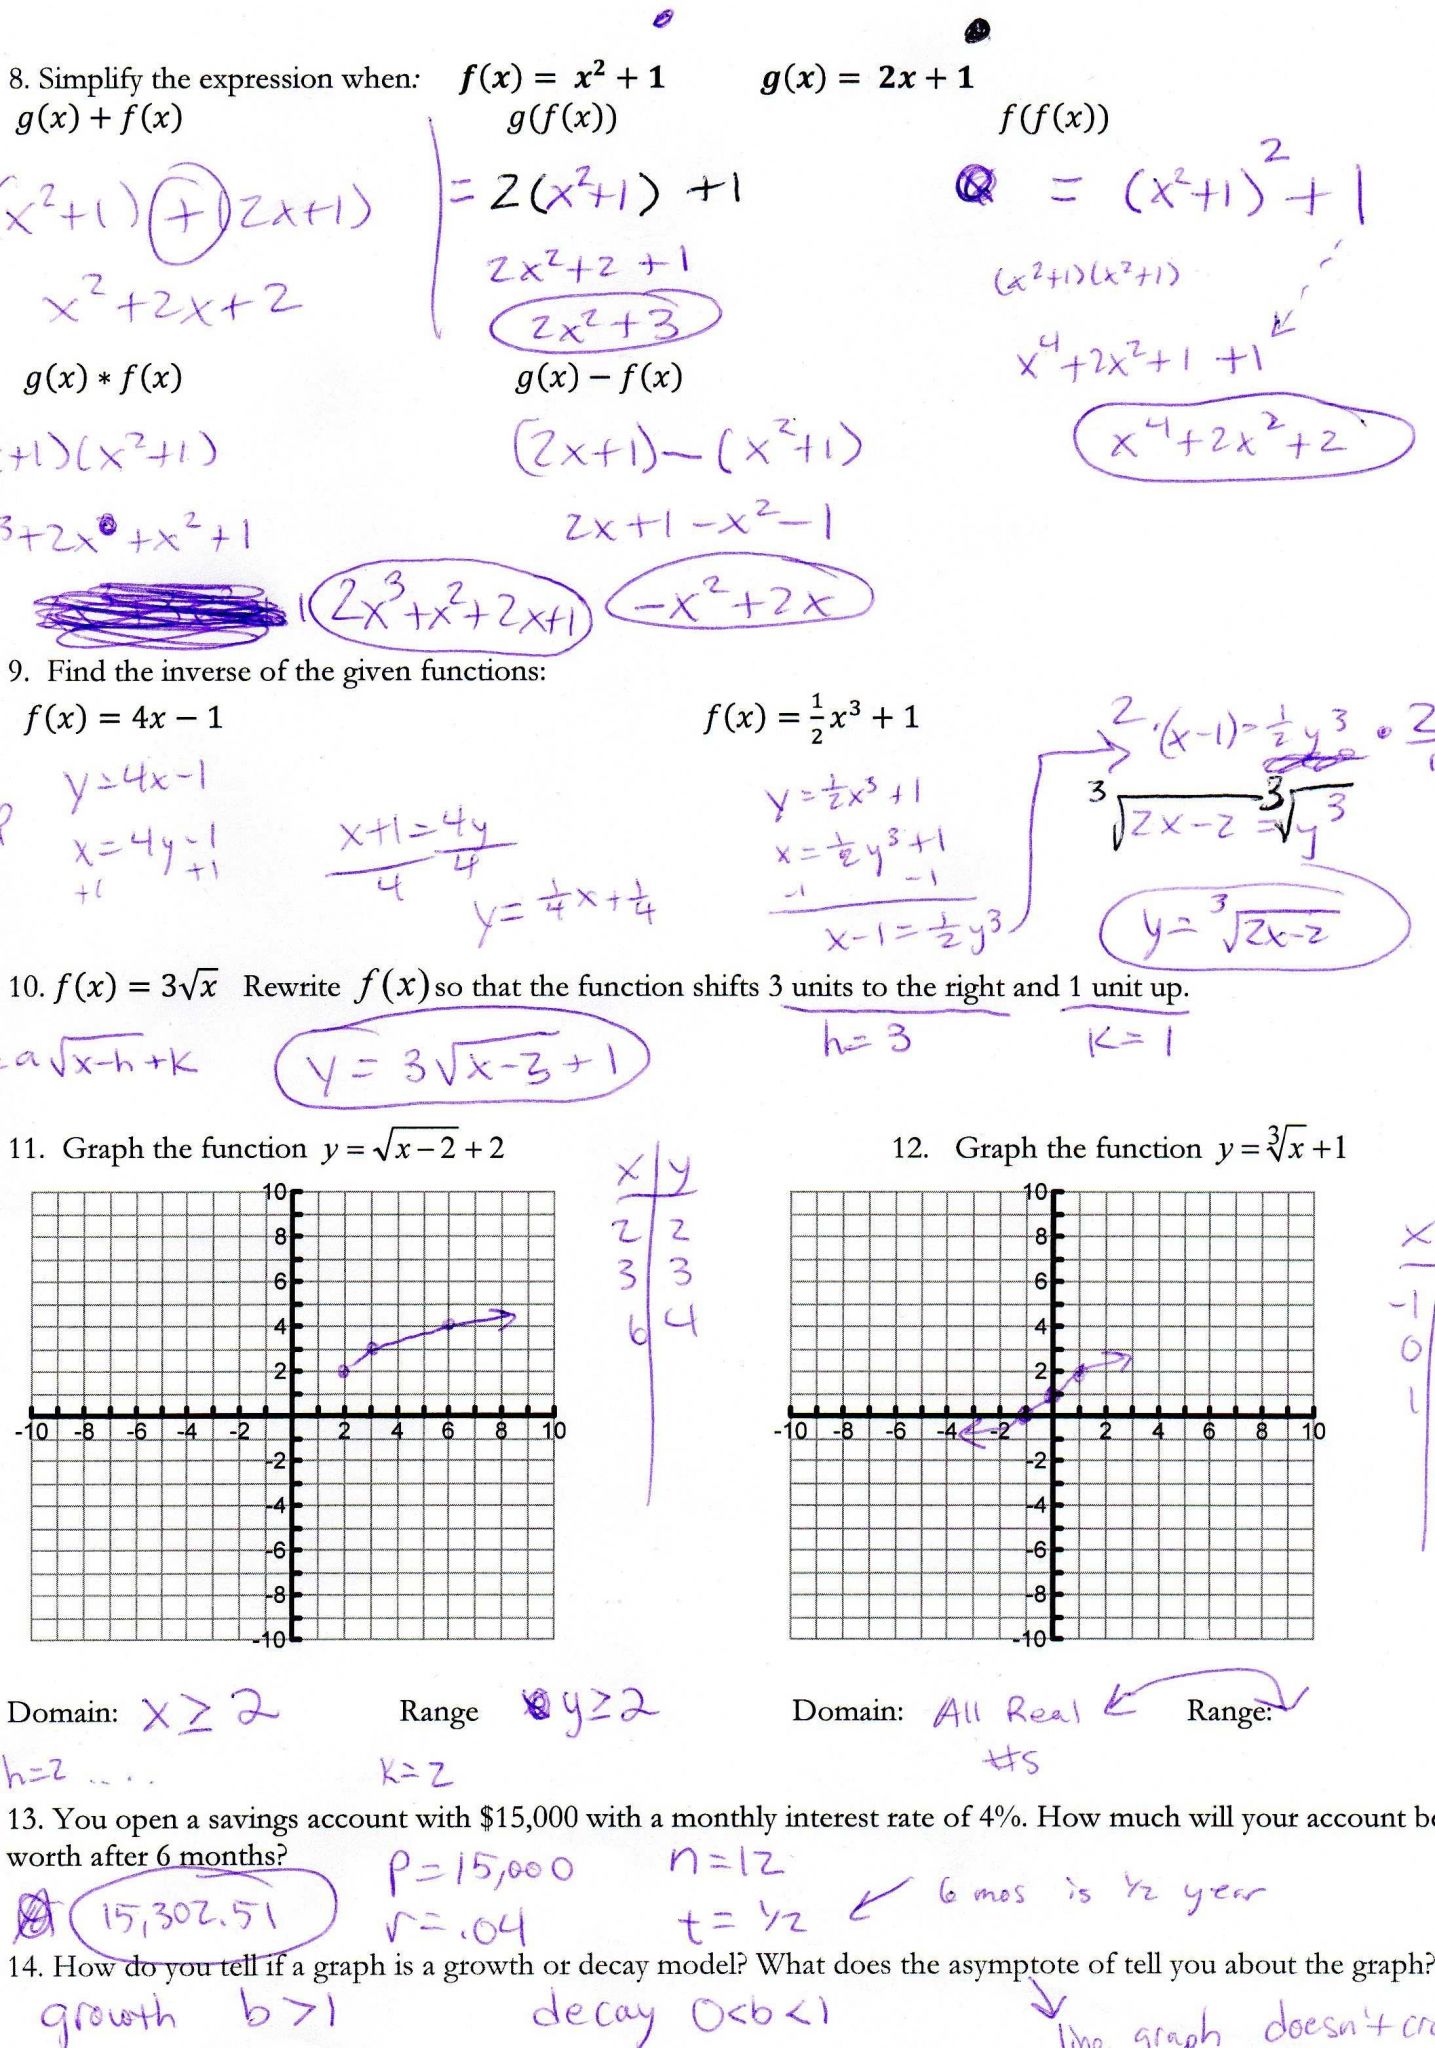 Graphing Exponential Functions Worksheet Answers Along with Graphing Quadratic Functions Worksheet Answers Algebra 2 Best 59